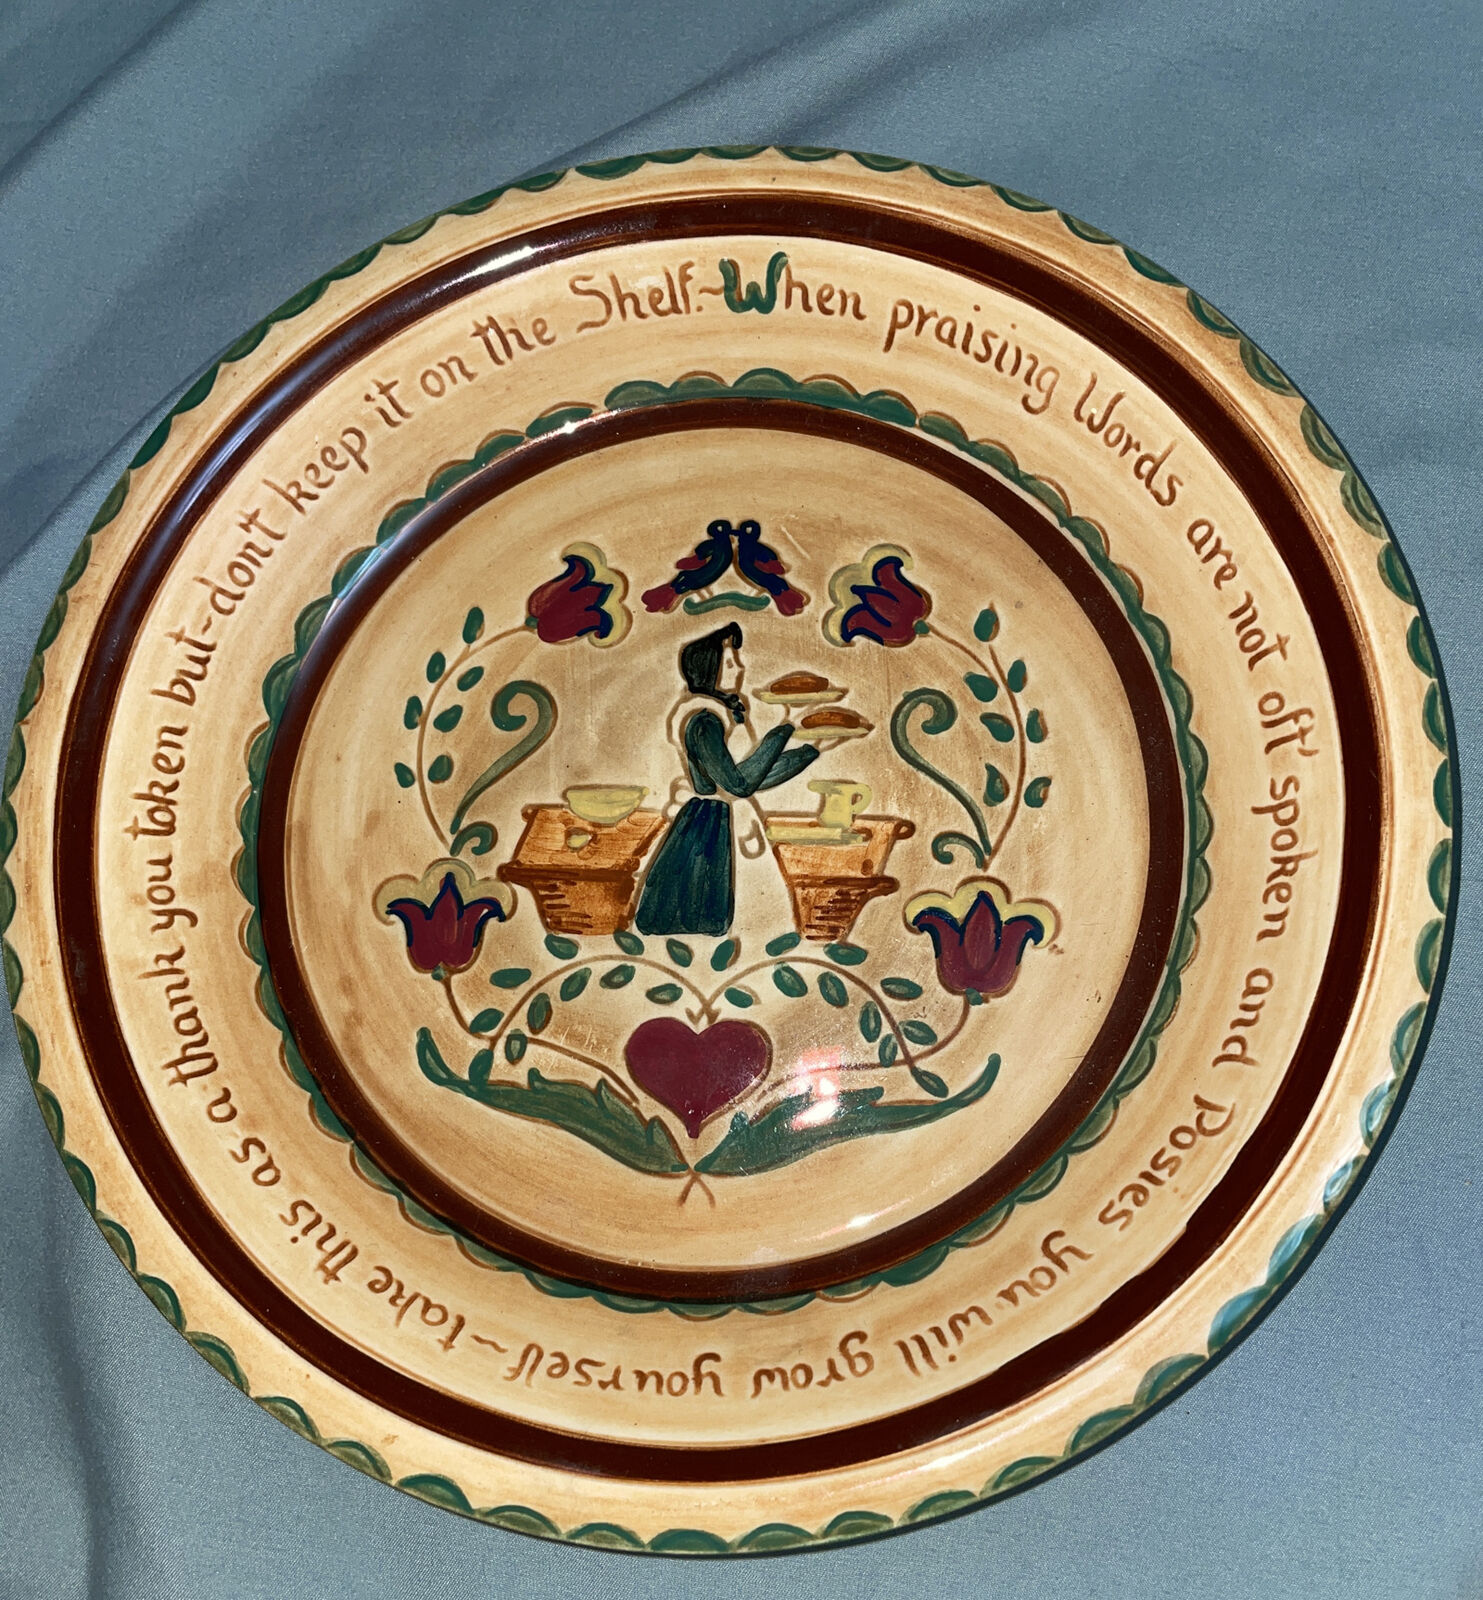 Pennsbury Pottery Pie Plate.  Amish Woman